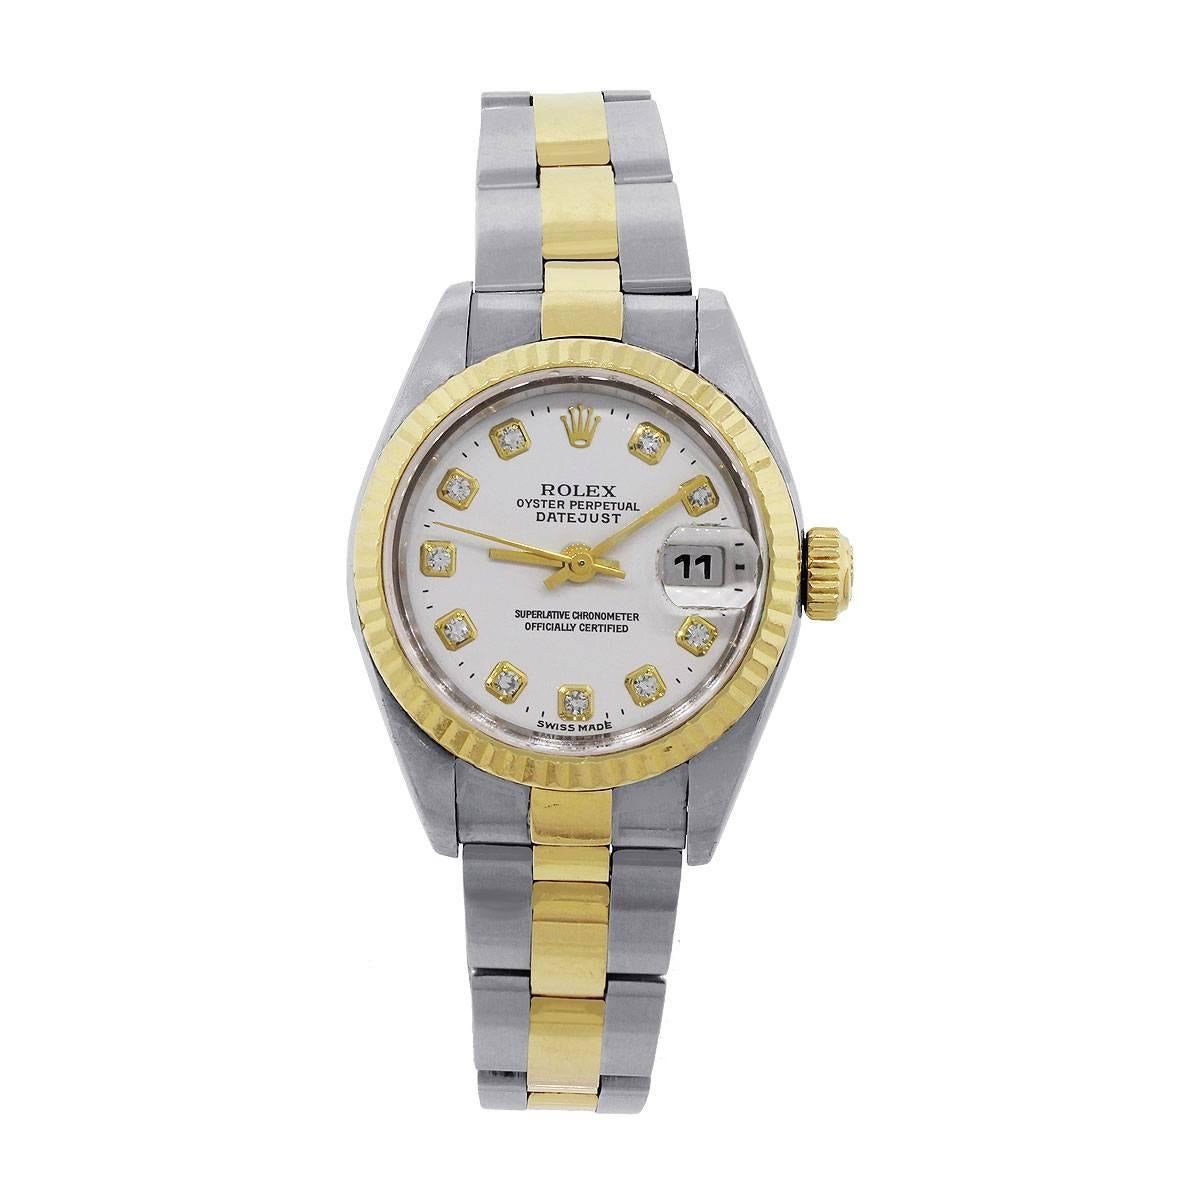 Brand: Rolex
Model: Datejust
Reference Number: 179173
Serial: “P”
Case Material: Stainless Steel
Dial: White Diamond Dial with Gold hands (factory)
Bezel: Fixed gold fluted bezel
Case Measurements: 26mm
Bracelet: Two Tone oyster band
Clasp: Fold